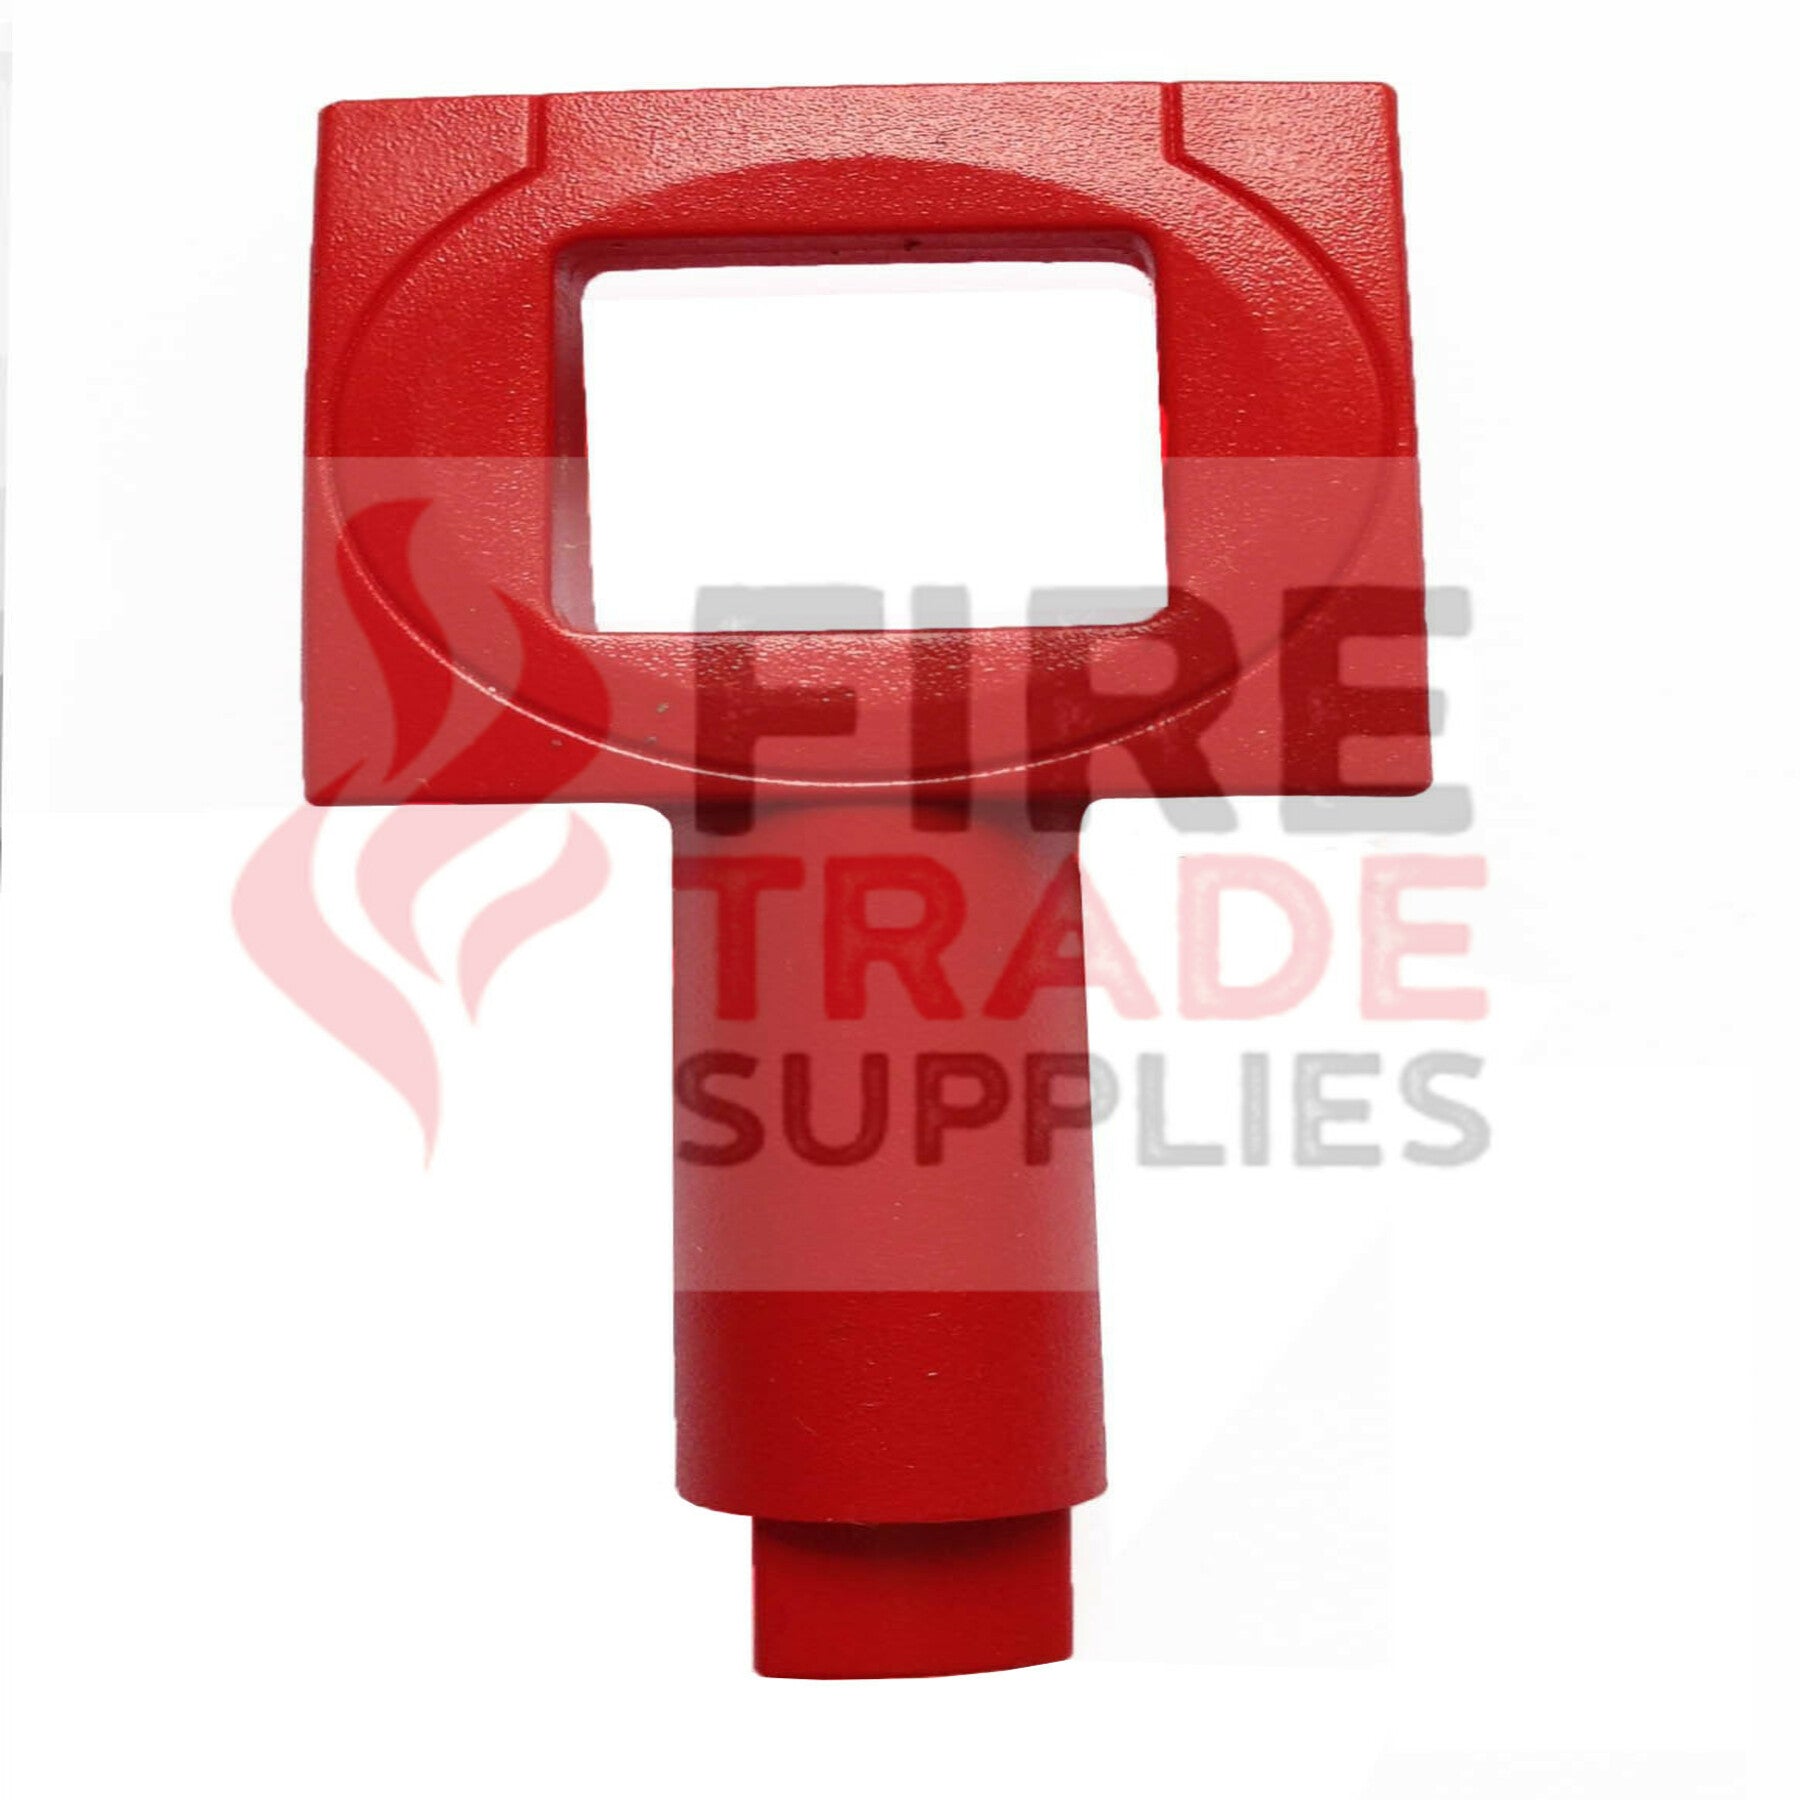 71167-91NM (S4-34899) Gent New Style Fire Alarm Call Point Test Key (pack of 10) - Fire Trade Supplies